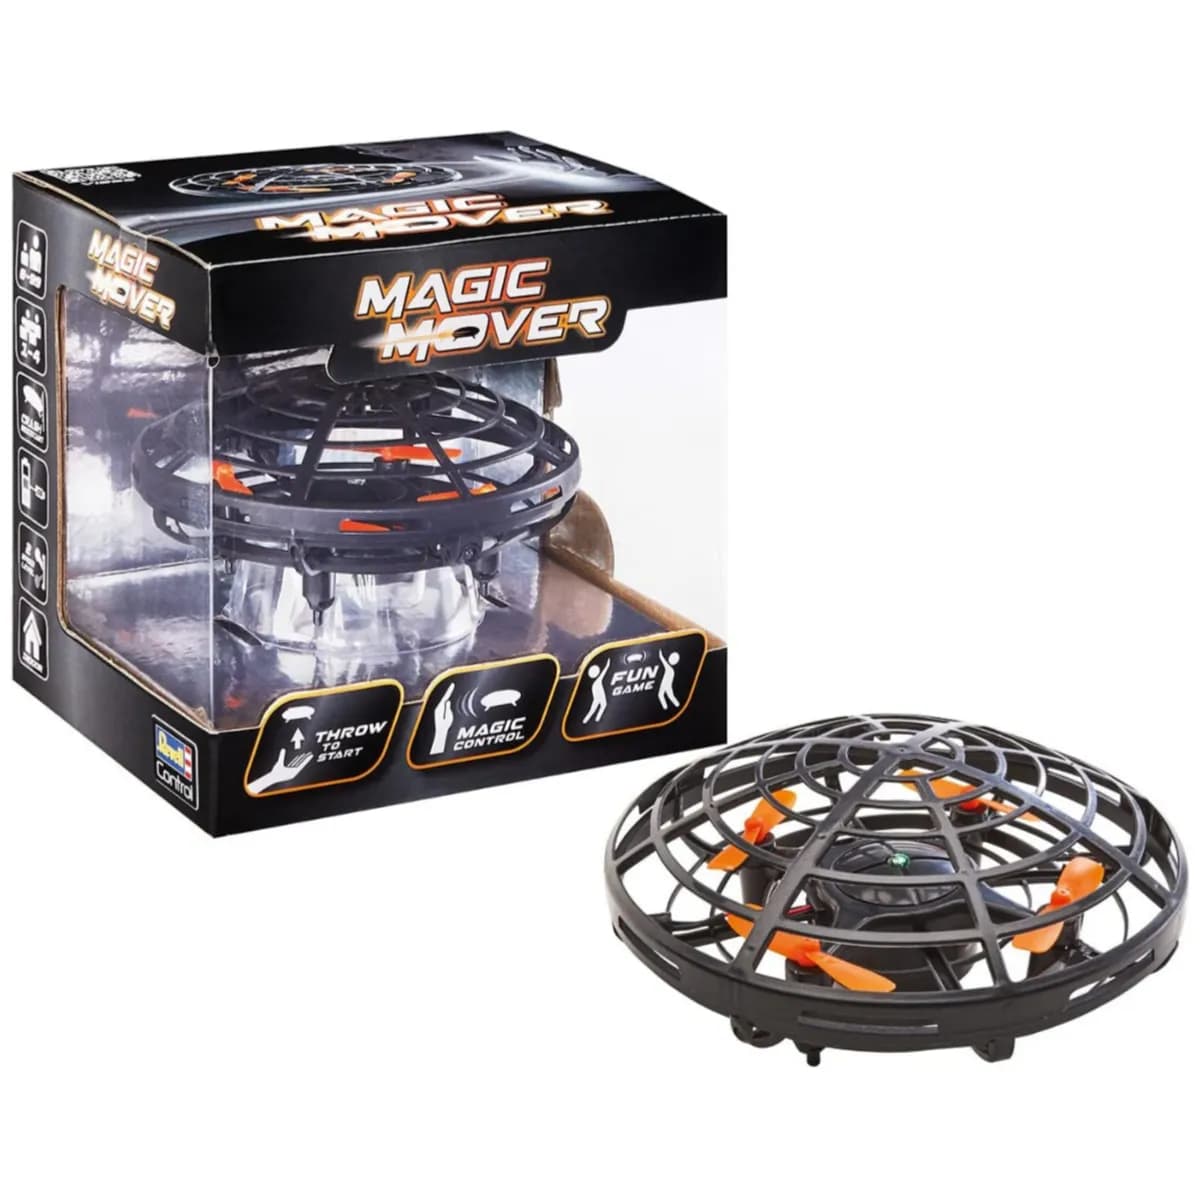 Revell Control Black Magic Mover Hand Controlled Drones Action Game  Toy For Kids - DEFS14